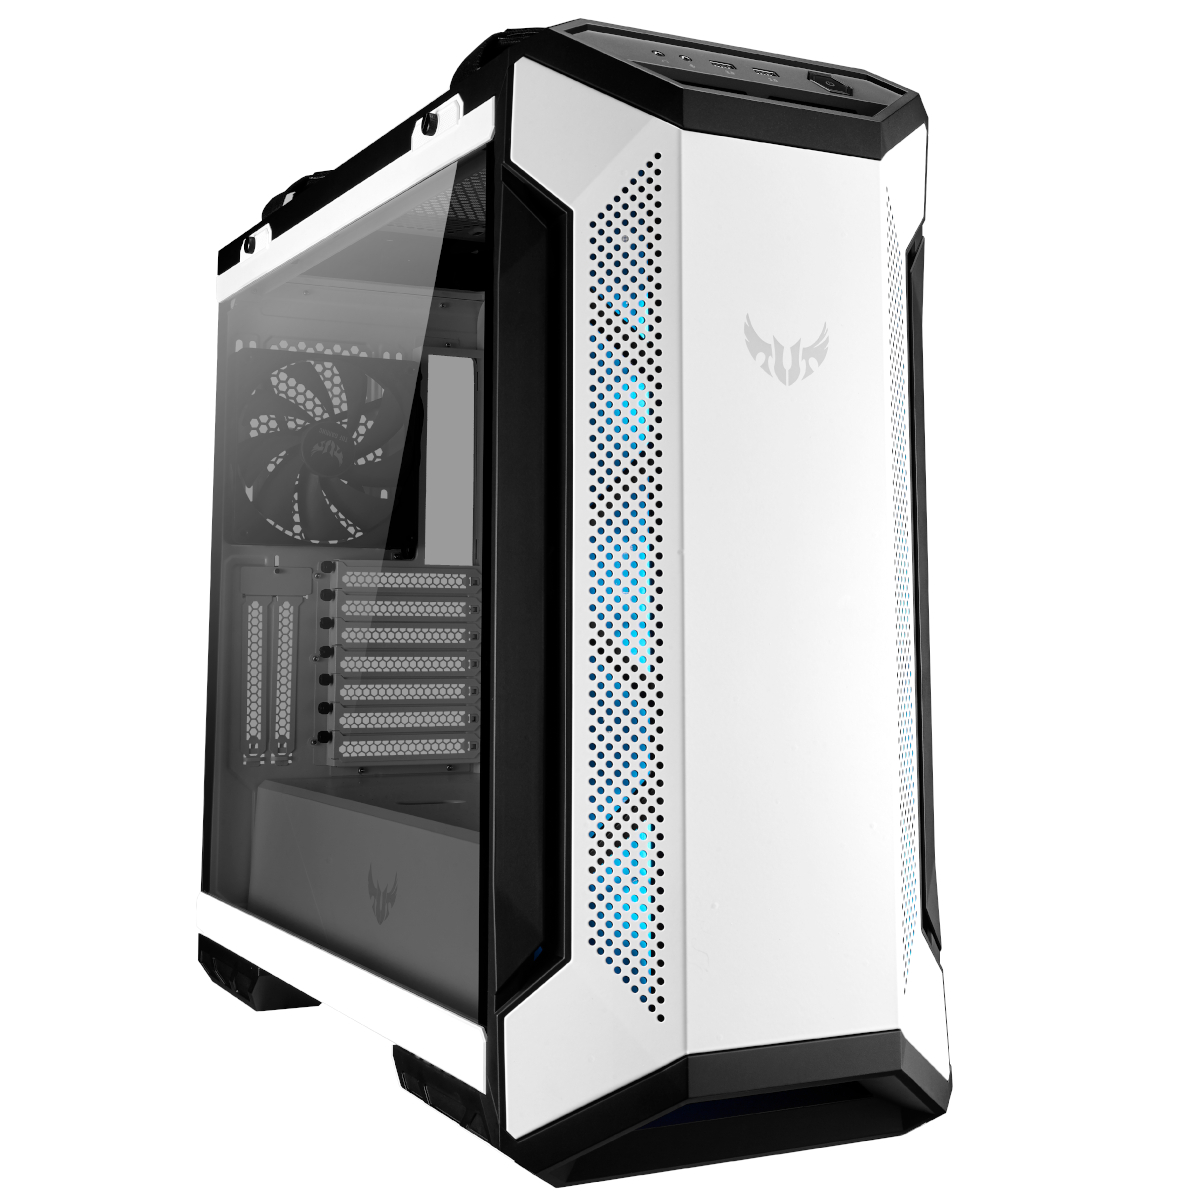 ASUS TUF Gaming GT501 Midi-Tower Case - White Tempered Glass